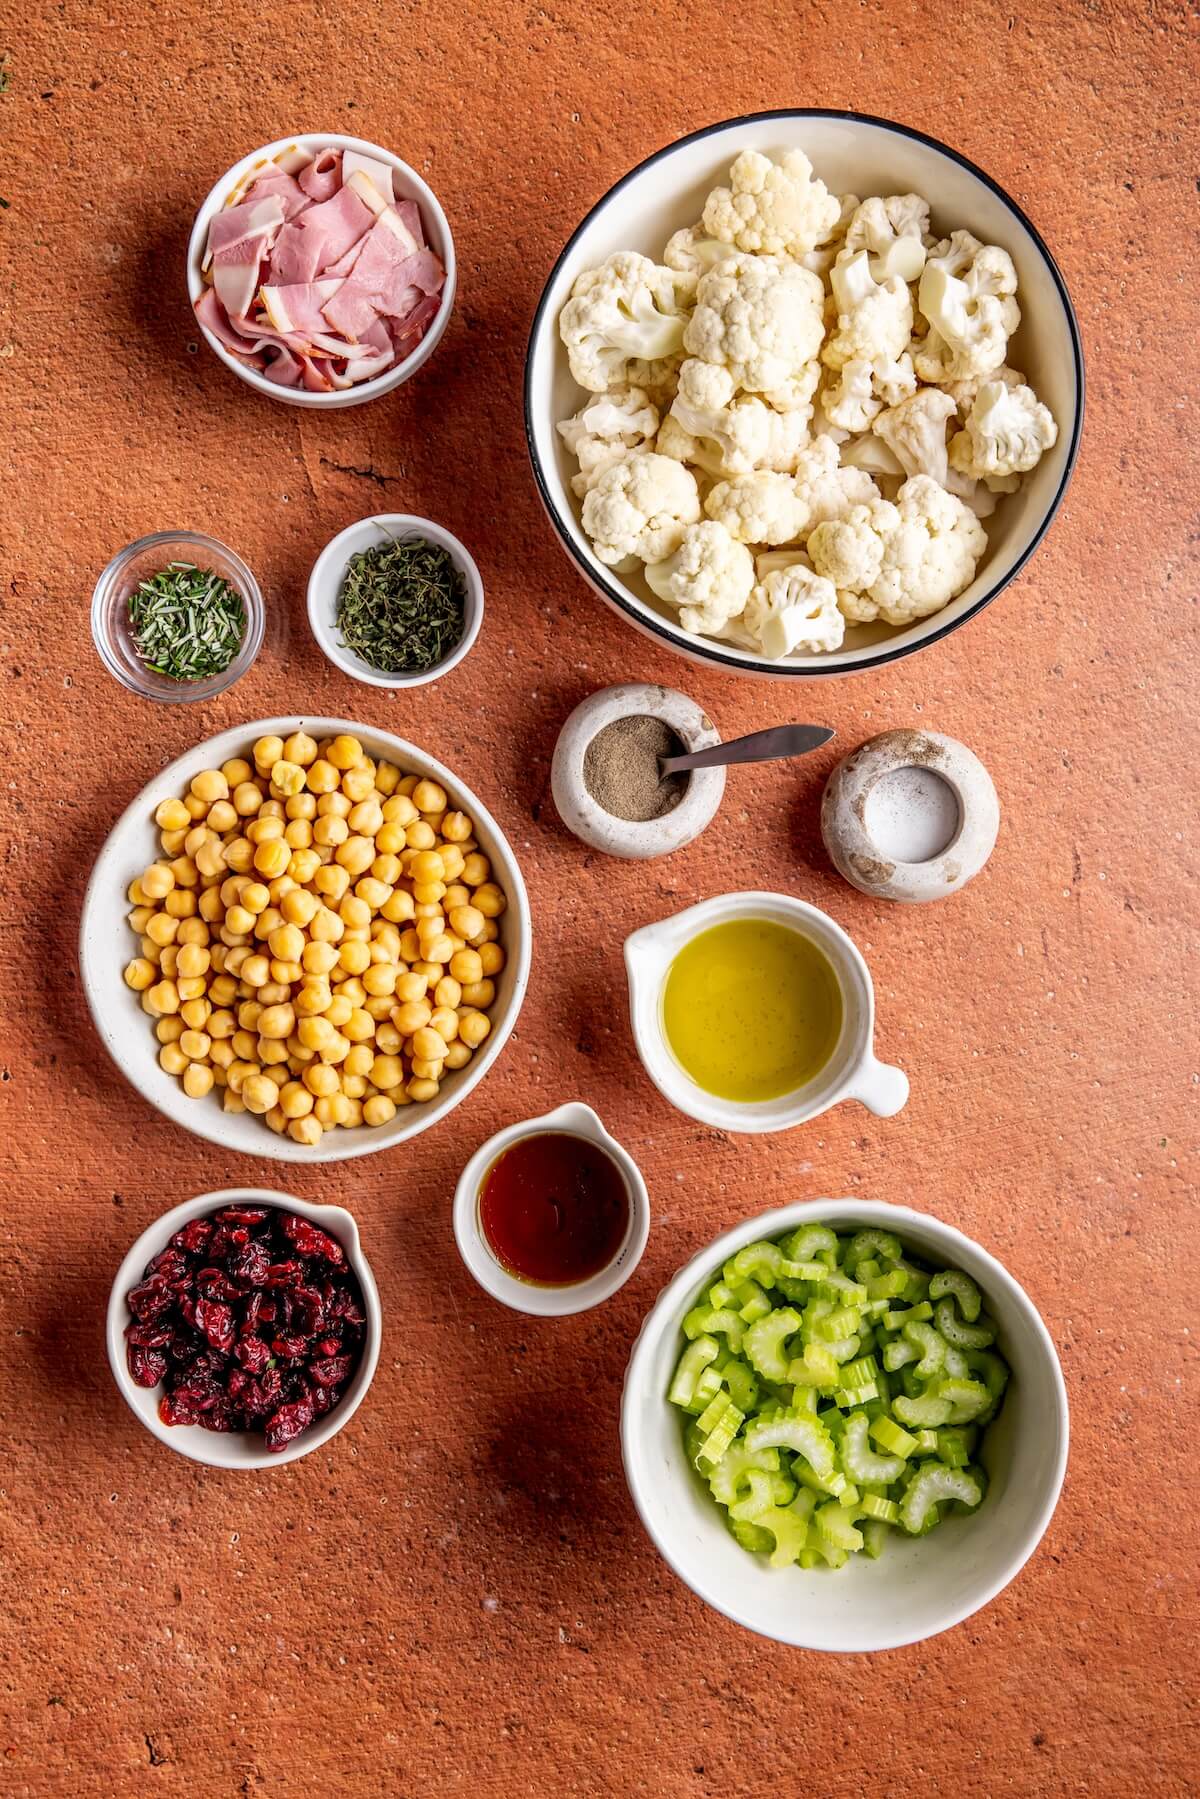 Herb and Maple Roasted Cauliflower with Chickpeas Ingredients - Olivia Adriance